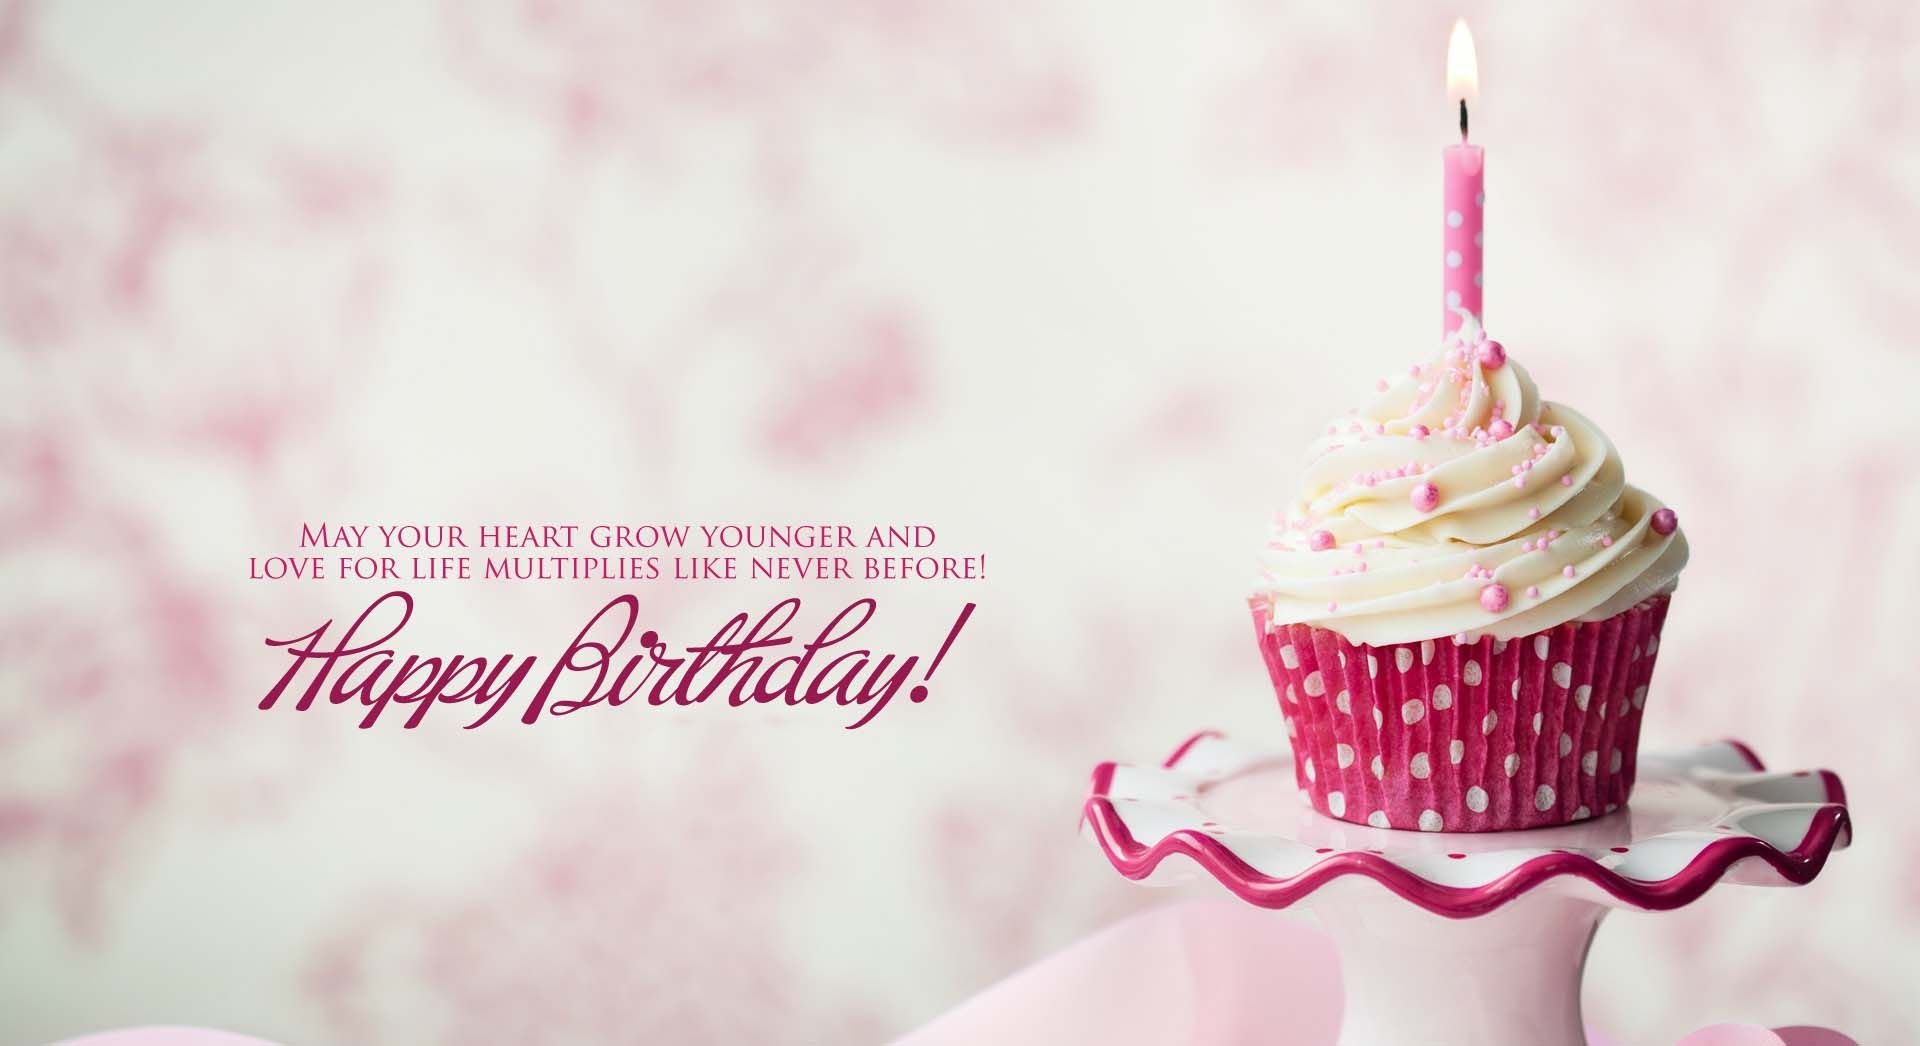 BirtHDay Cake Widescreen Wallpaper Happy Brother HD